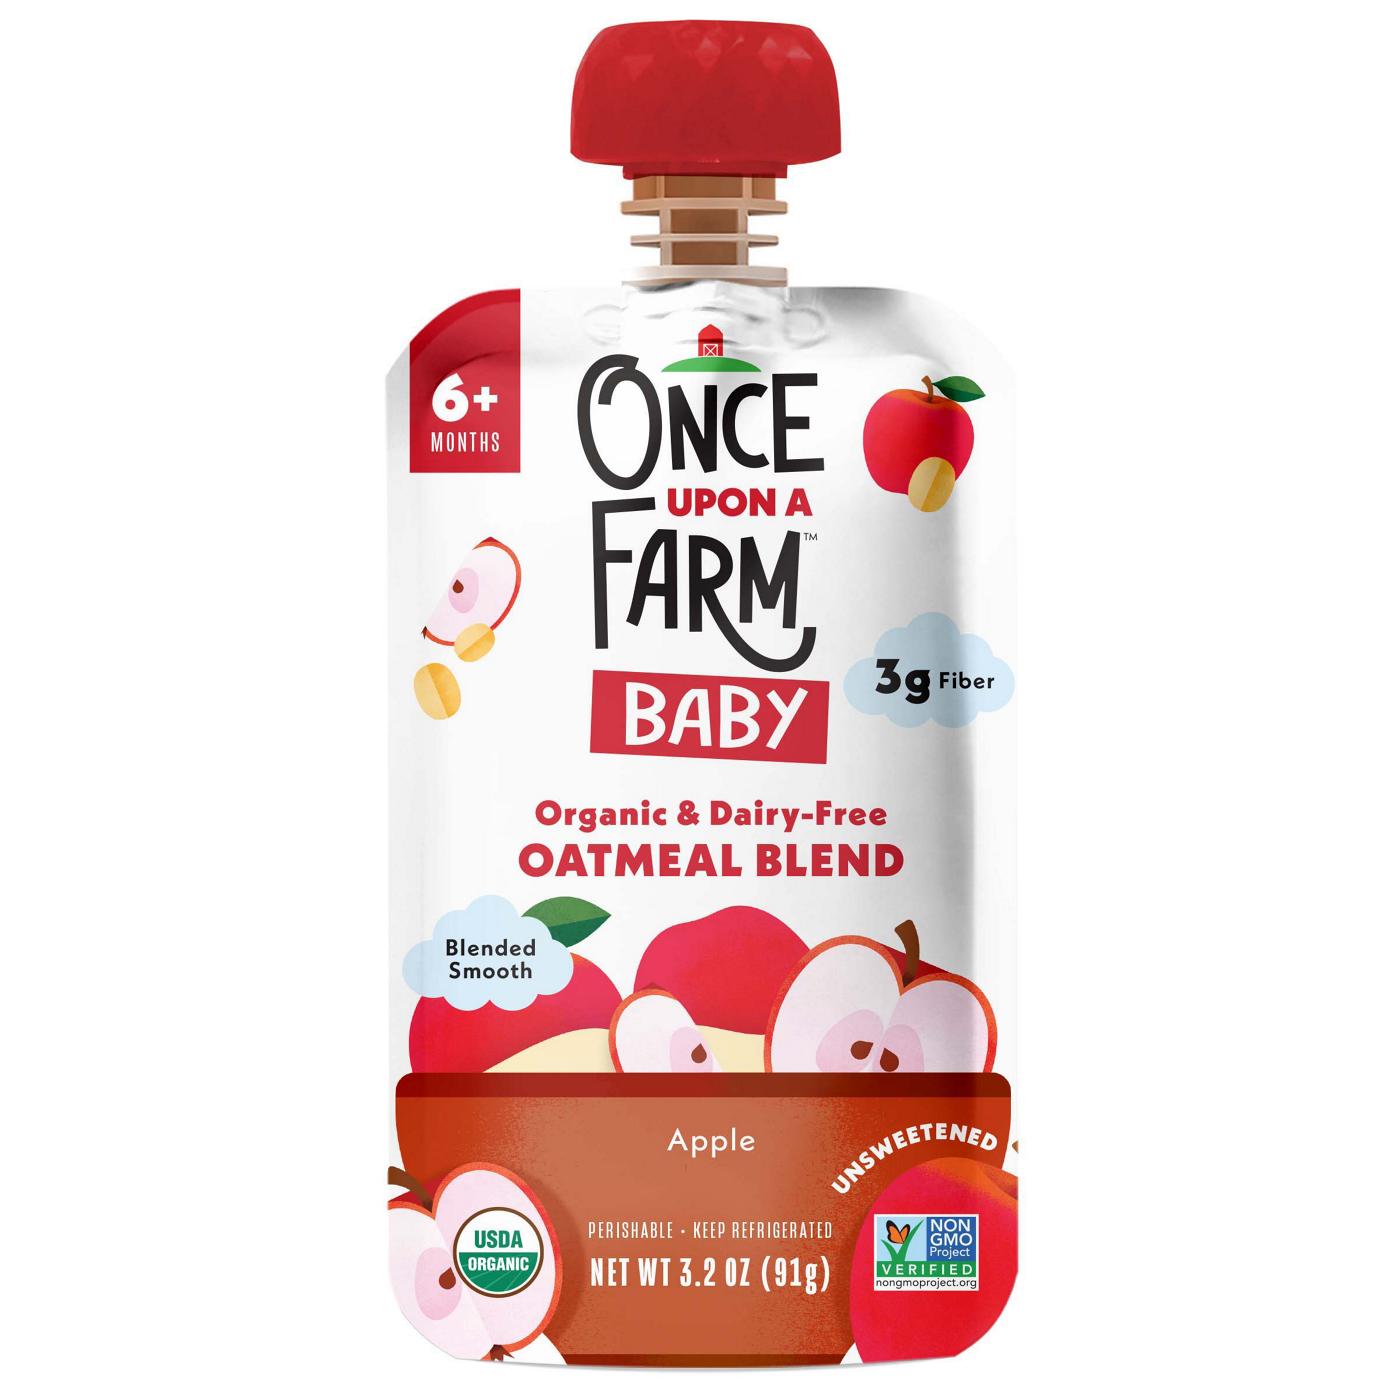 Once Upon a Farm Organic Oatmeal Blend Baby Food Pouch - Apple; image 1 of 2